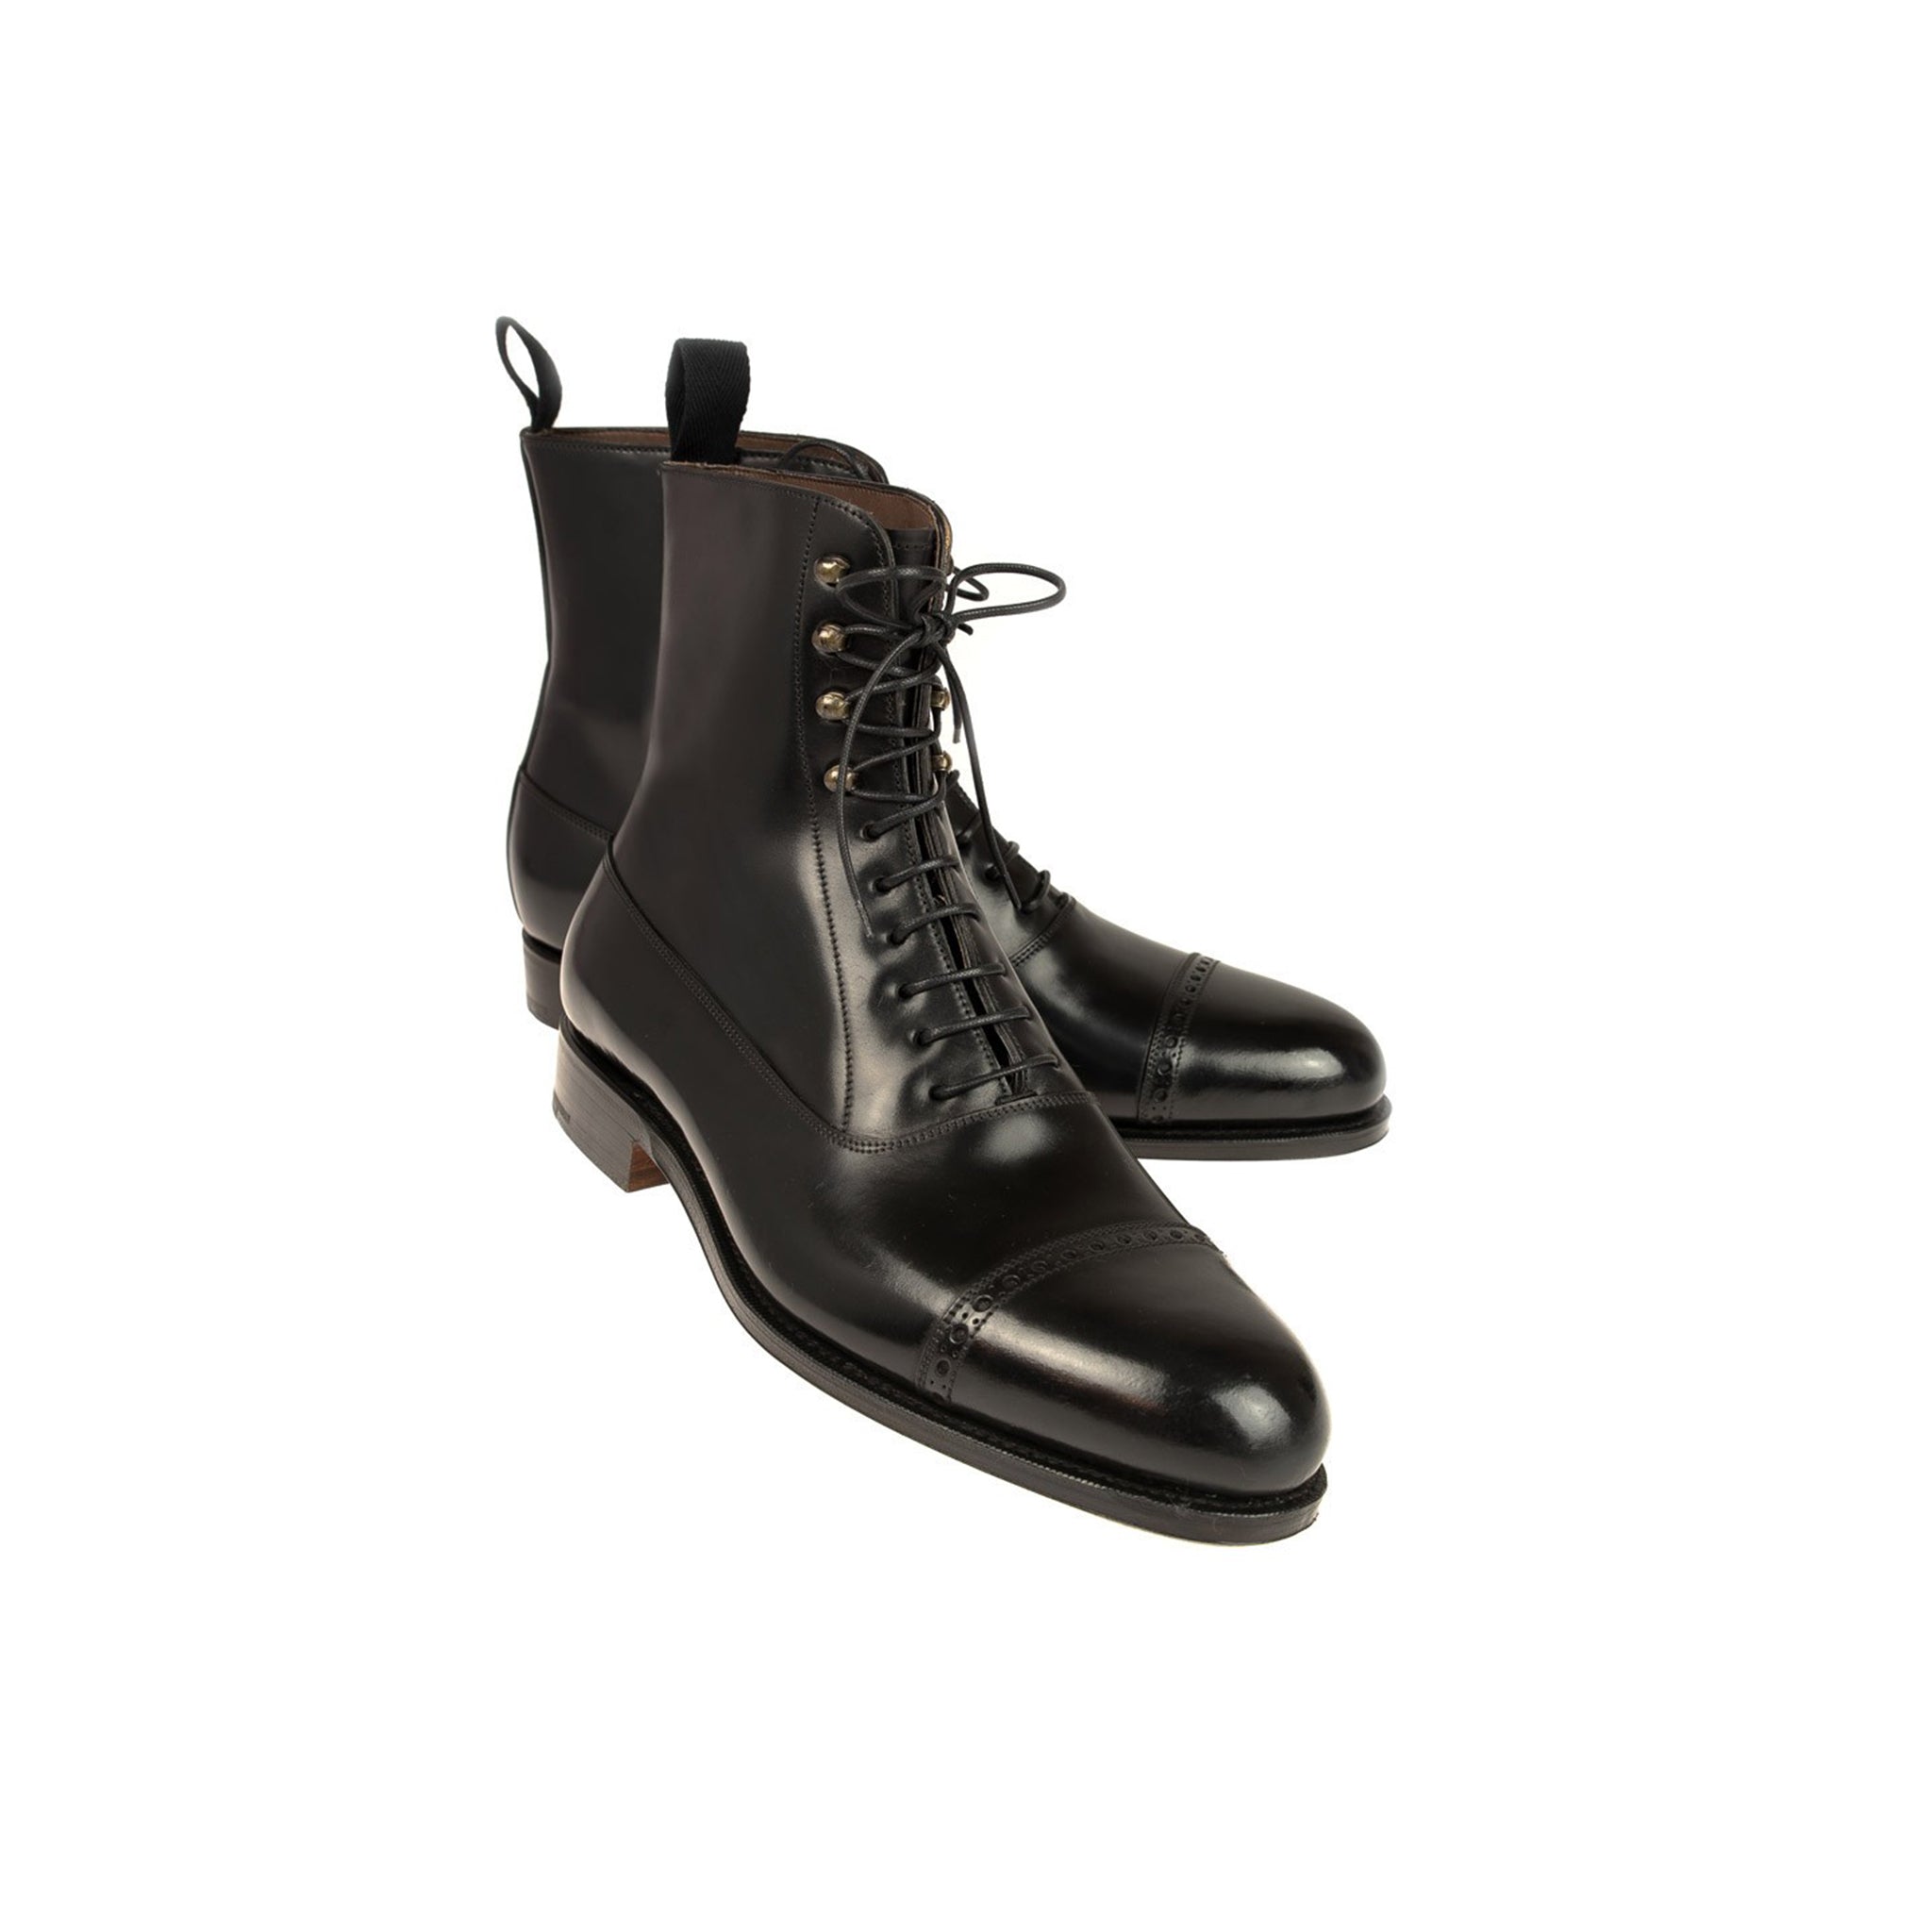 Midnight Lace-up High Ankle Boots